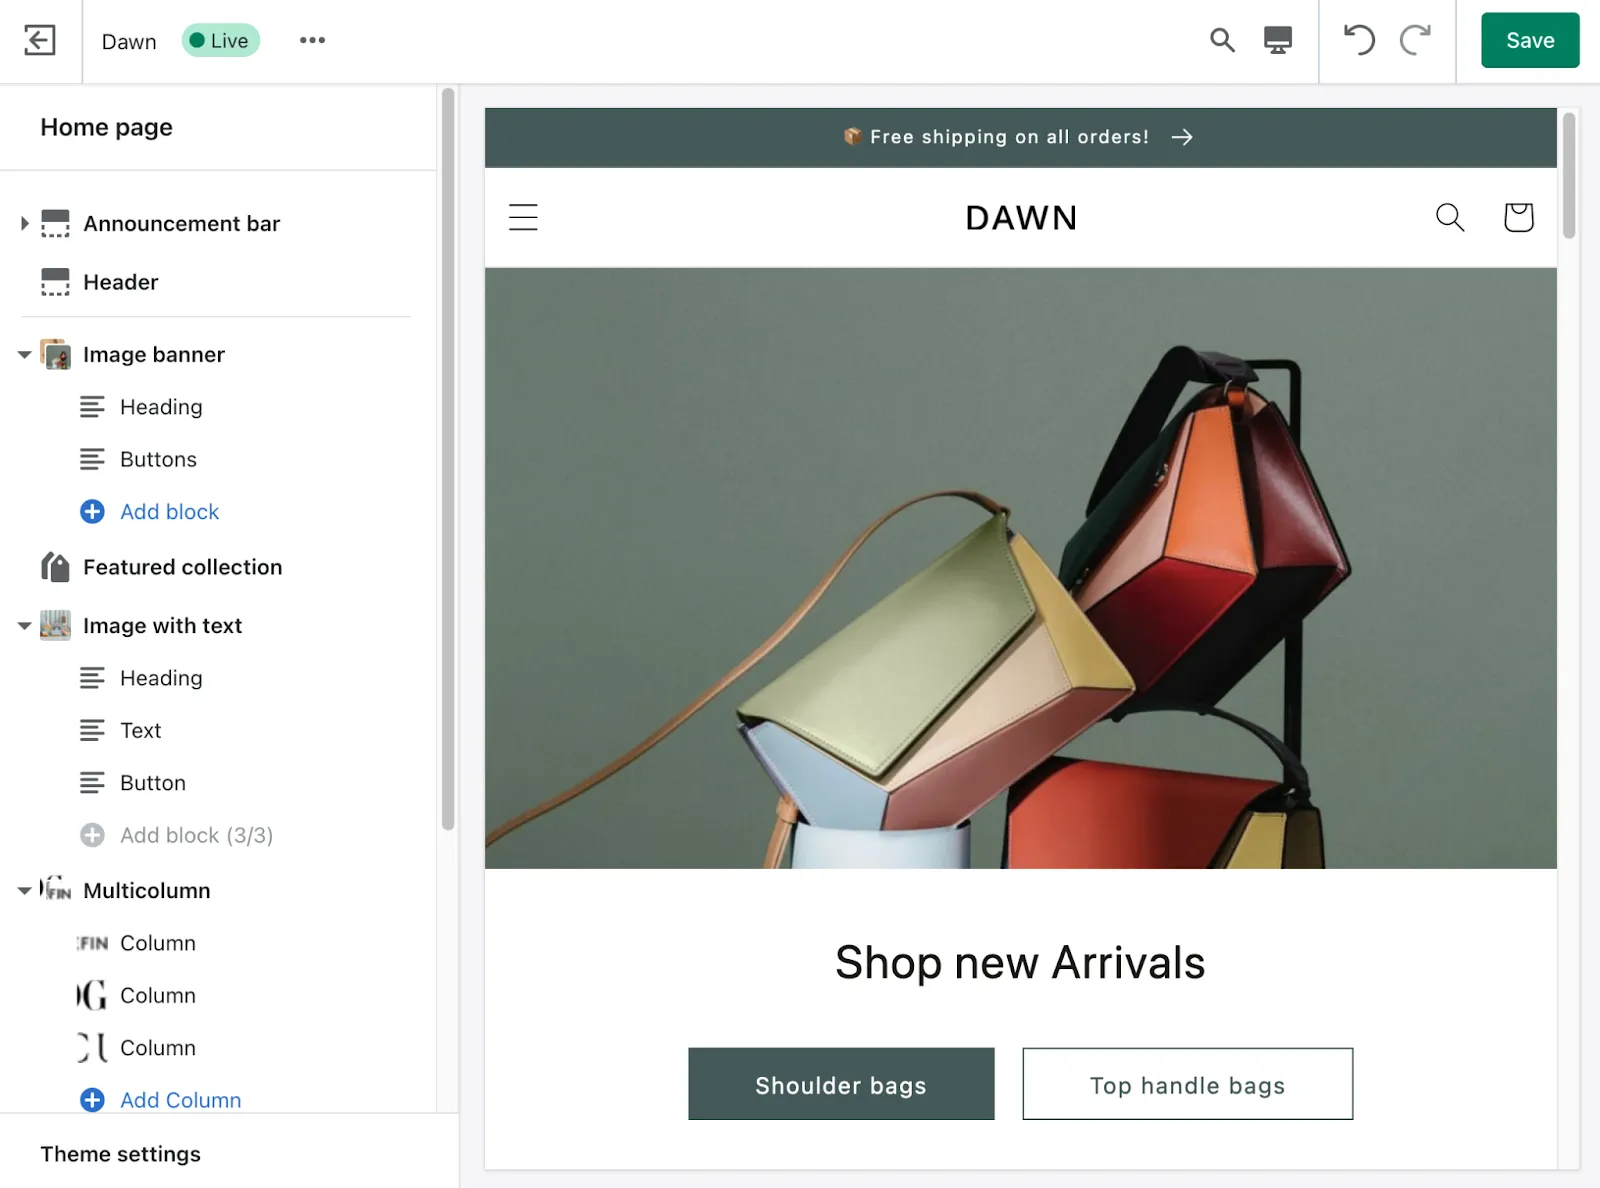 Shopify’s theme editor lets you customize your store seamlessly